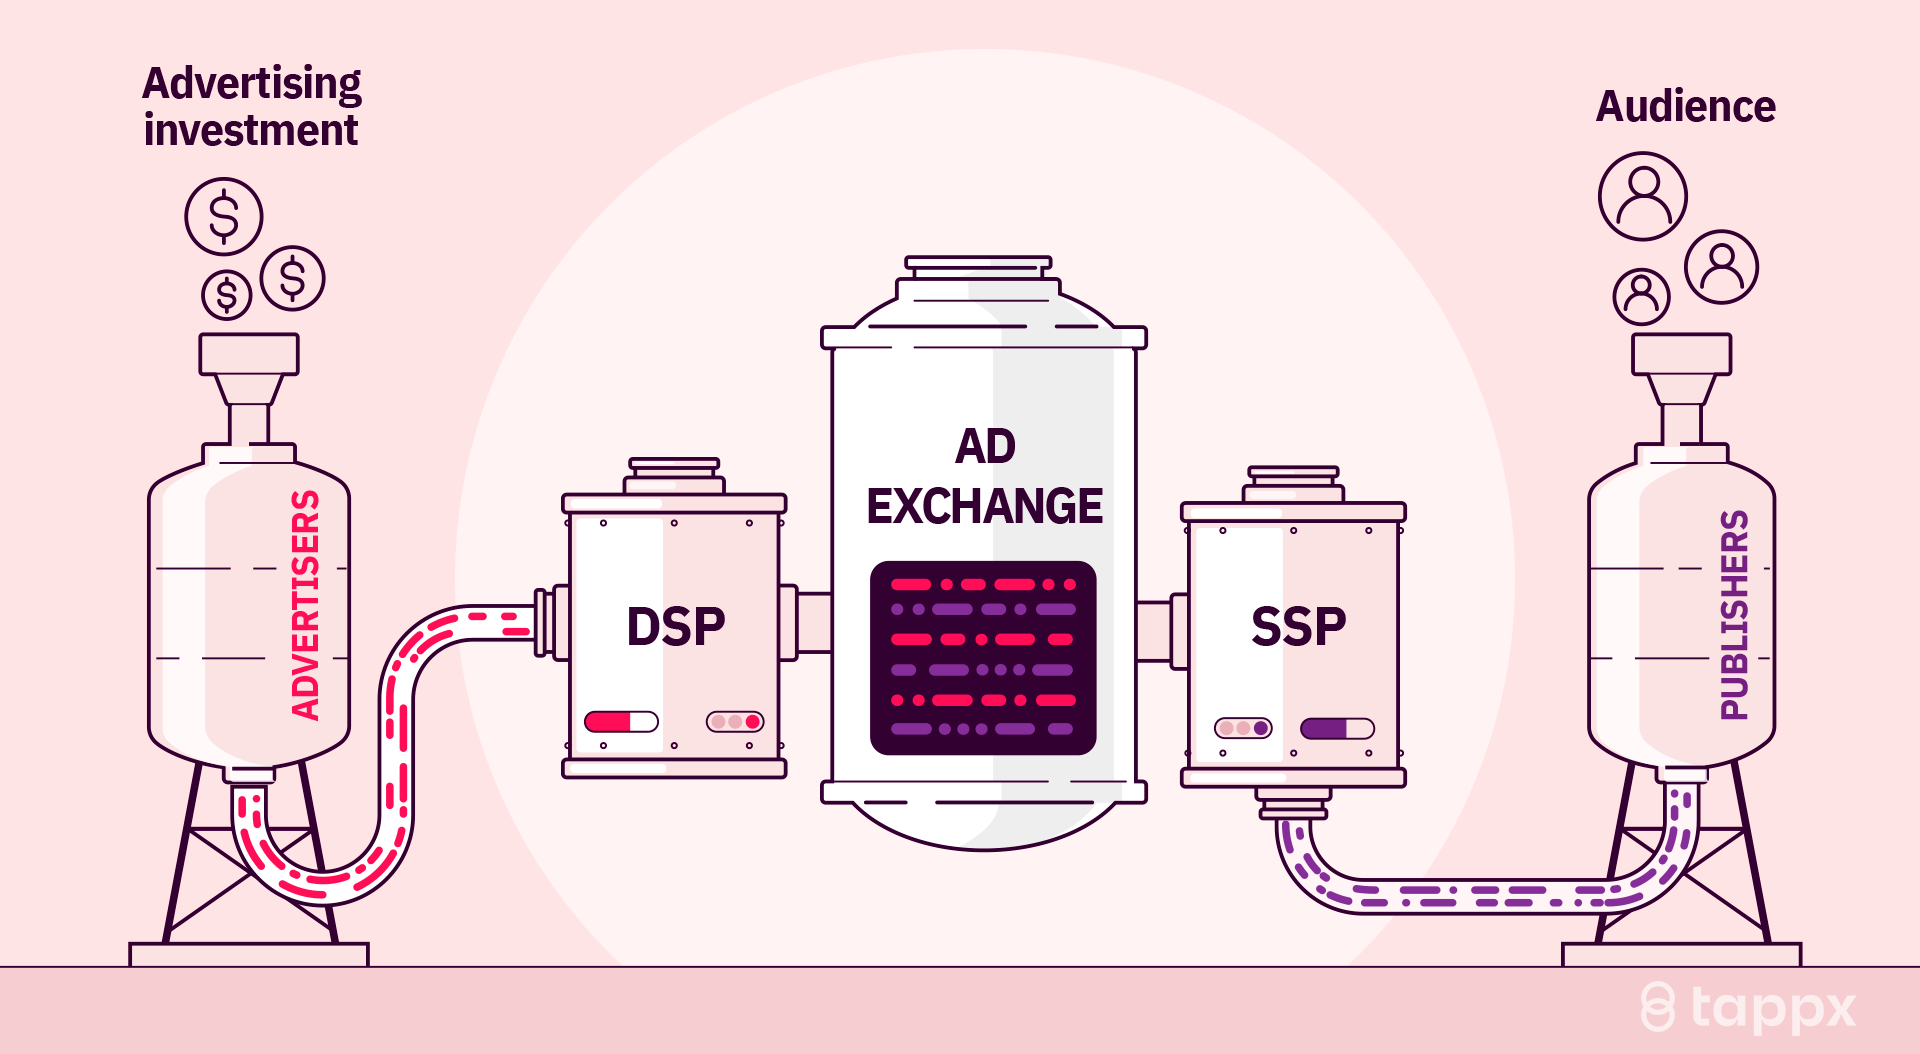 How the programmatic advertising ecosystem works